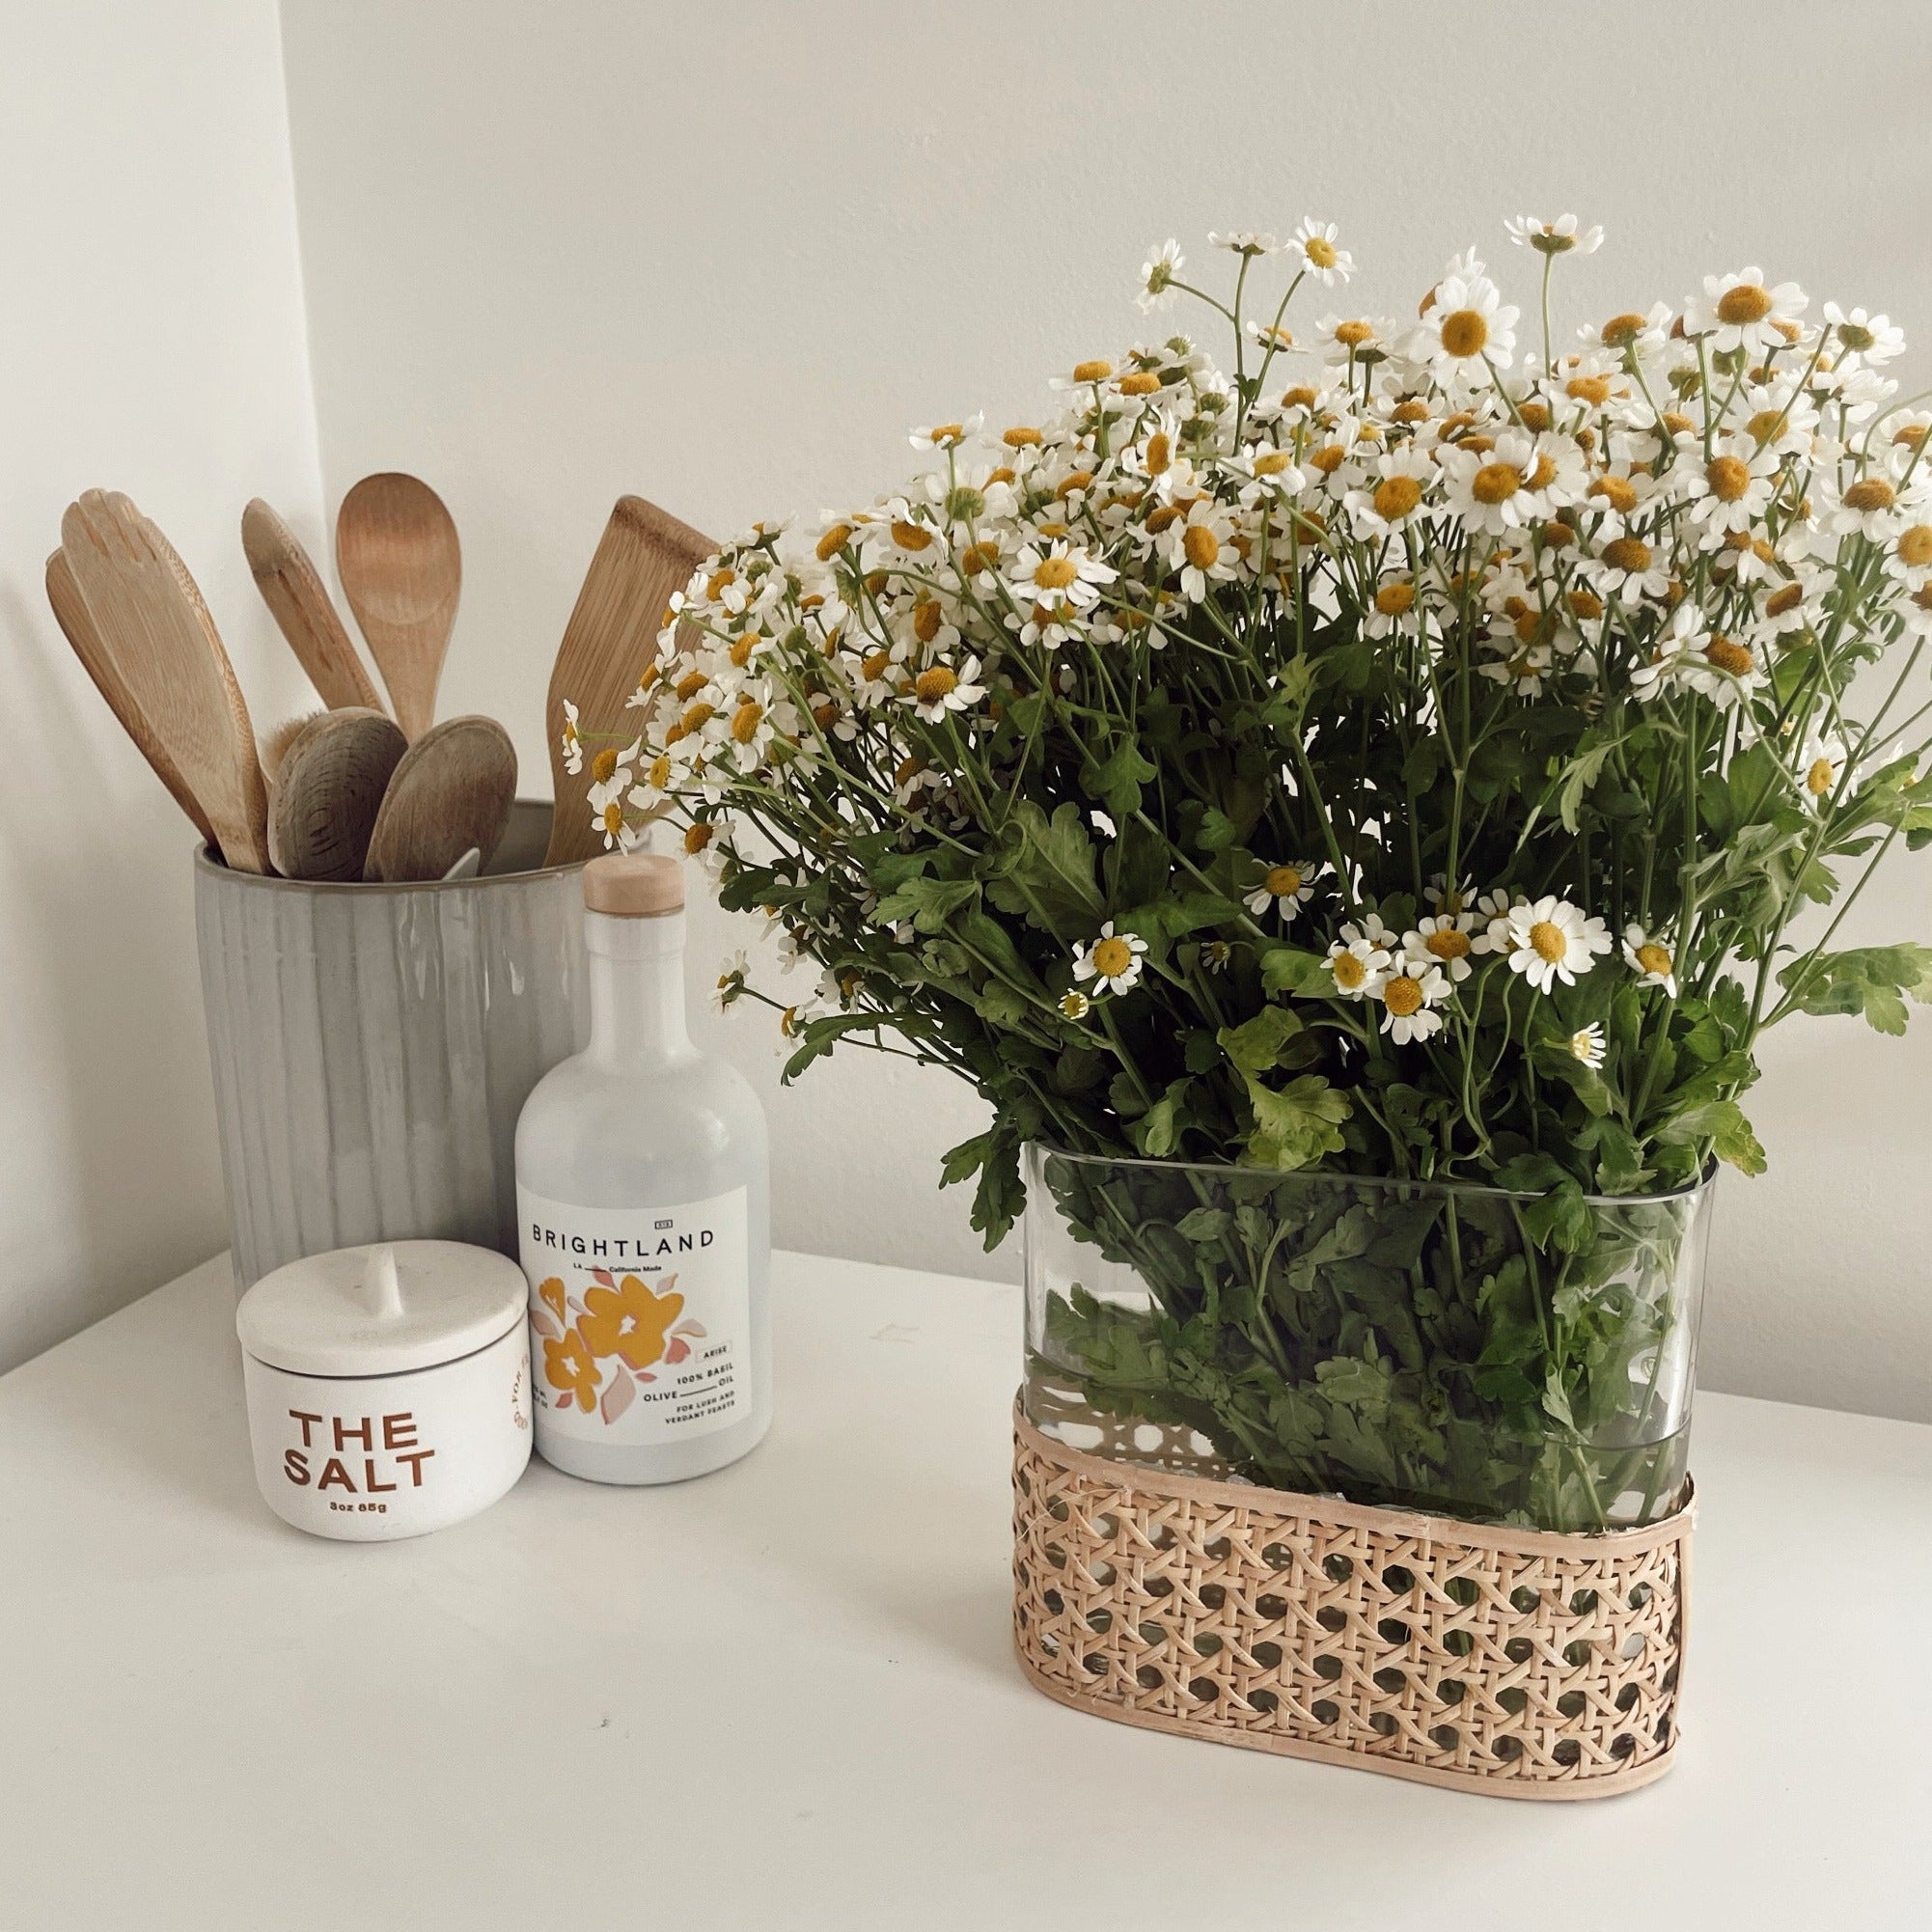 A rattan-wrapped glass vase holding white and yellow daisies next to a utensil jar, a salt cellar, and an olive oil bottle on a white table against a white background